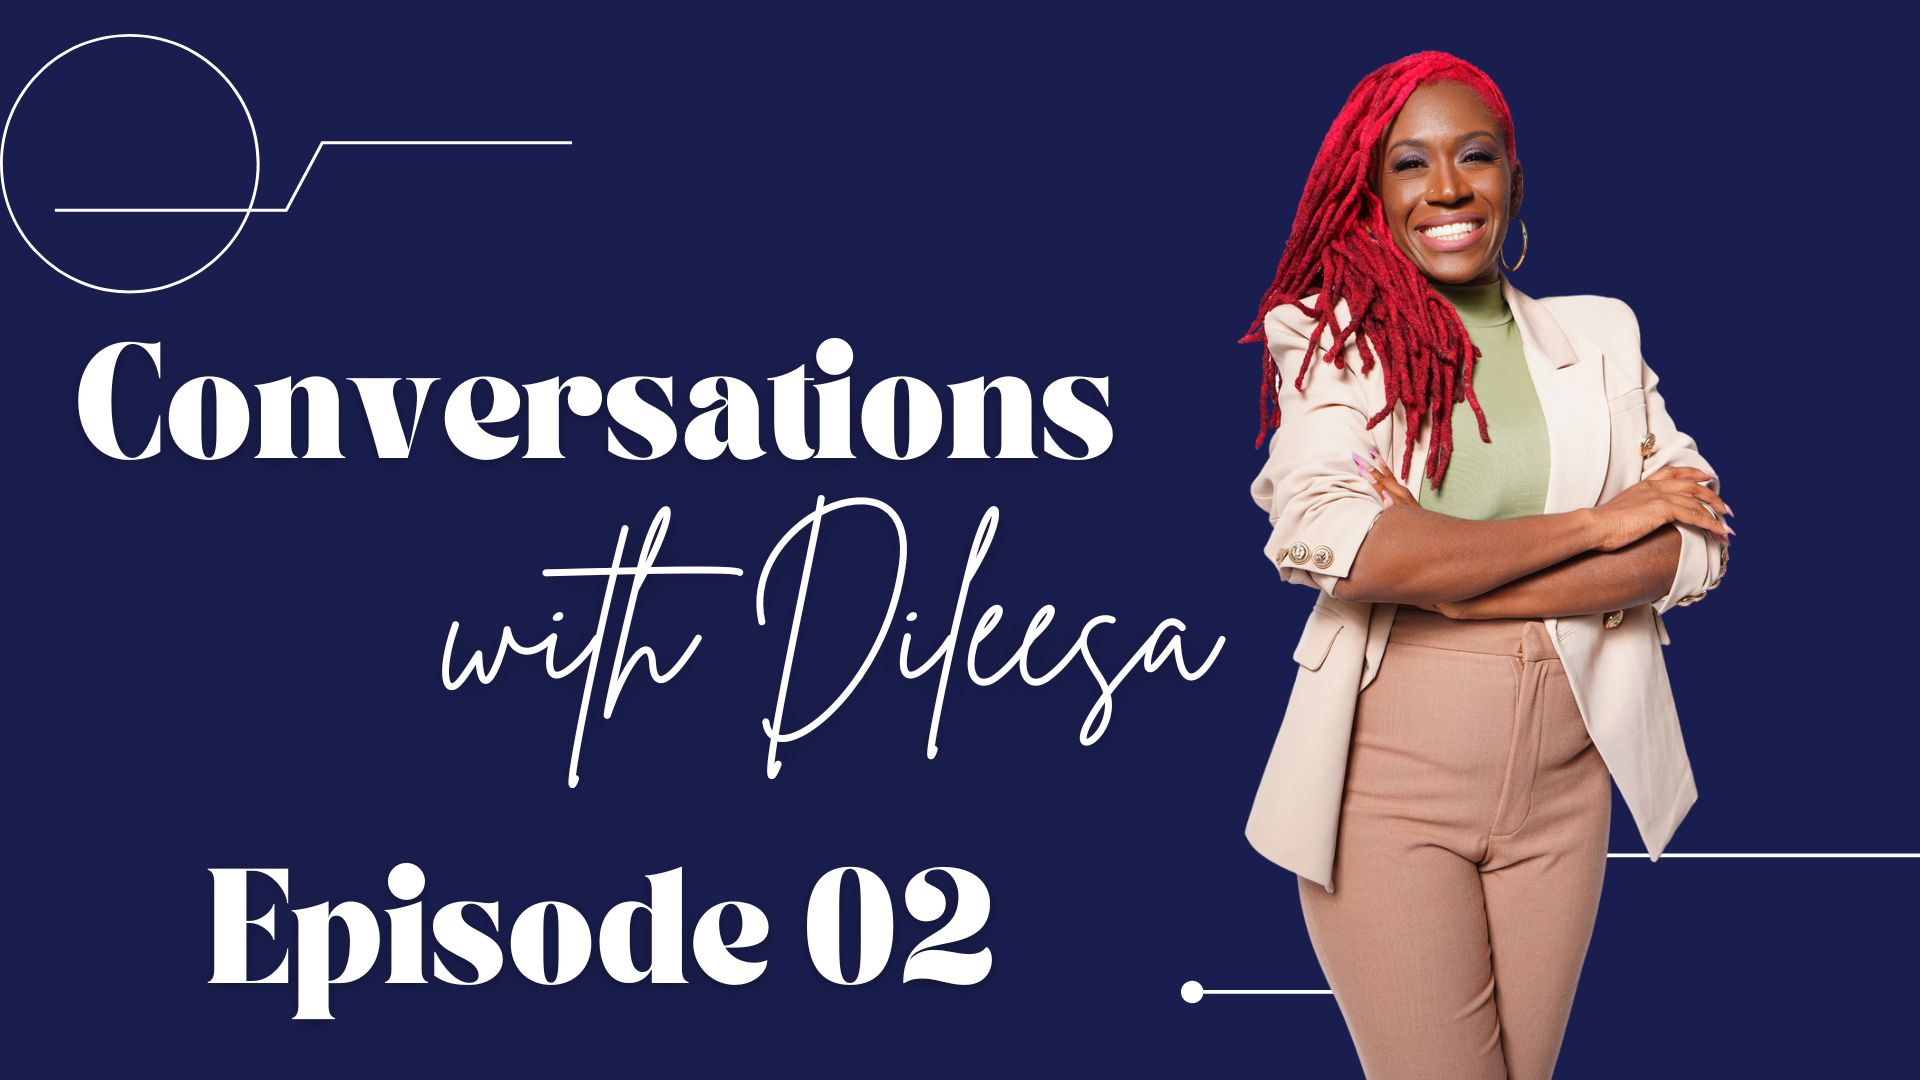 Conversations with Dileesa – Episode 02